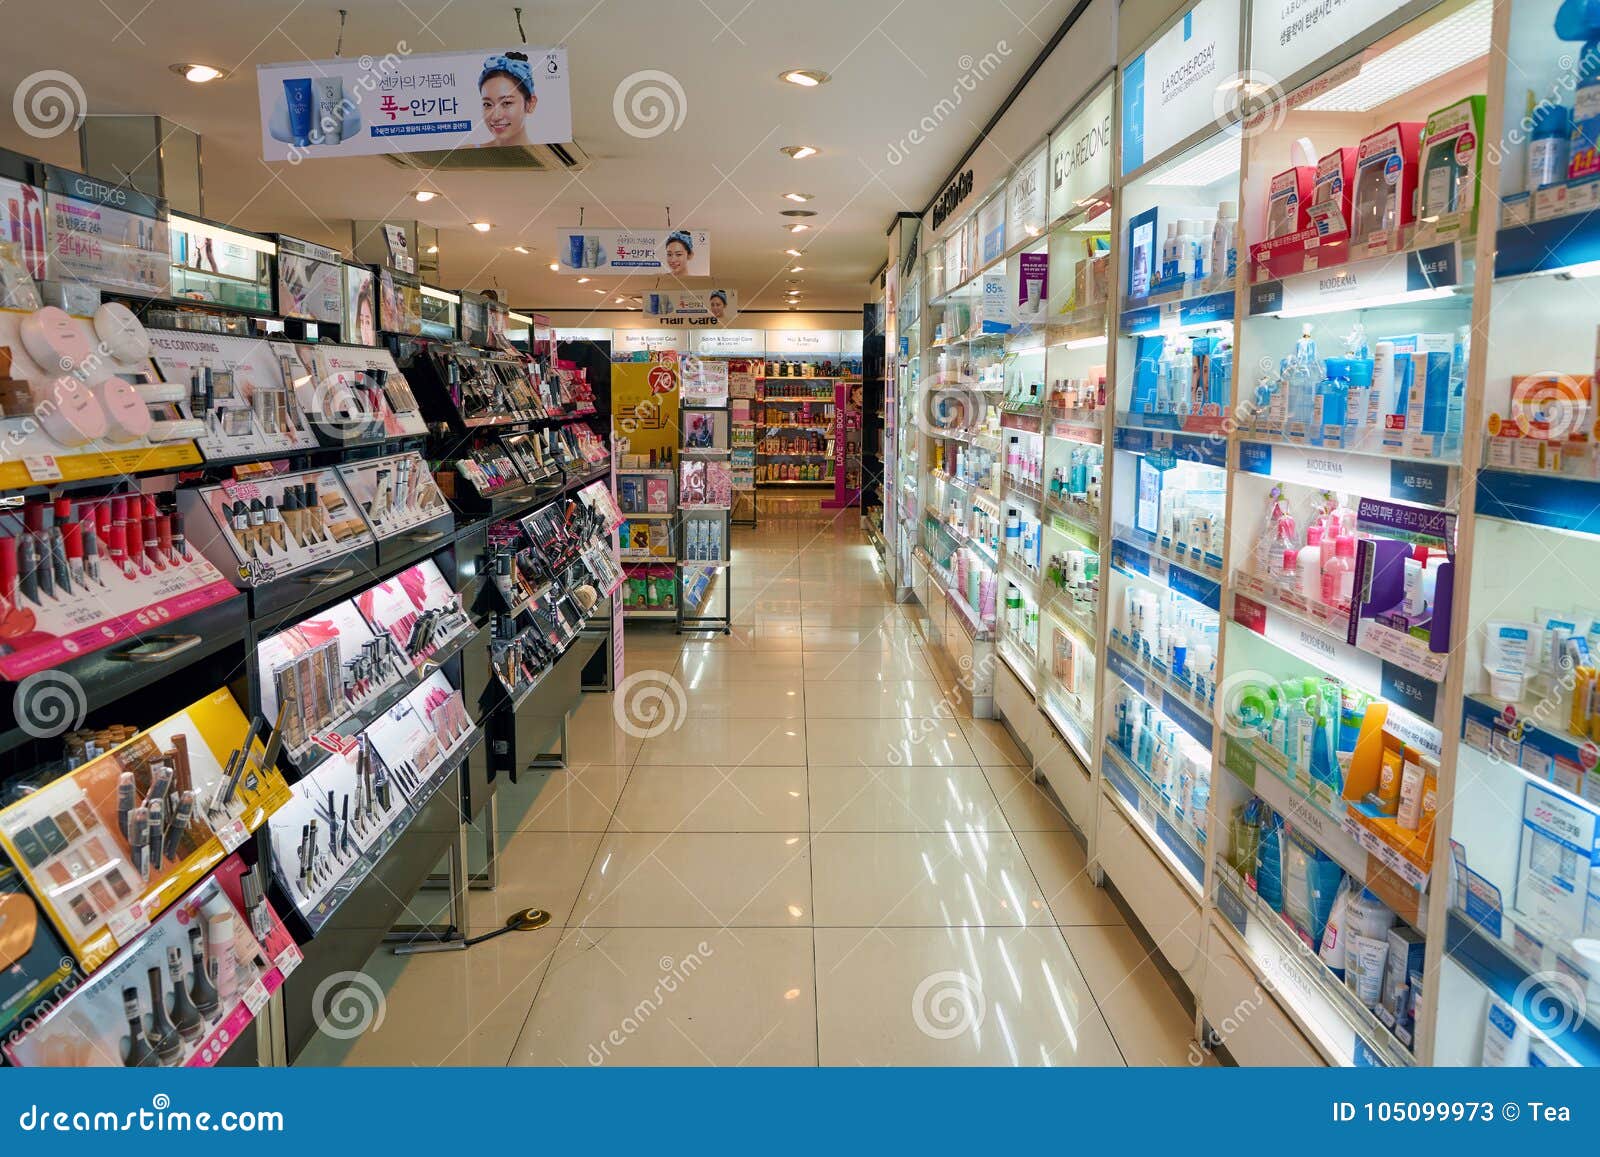 Watsons editorial stock photo. Image of shop, color ...